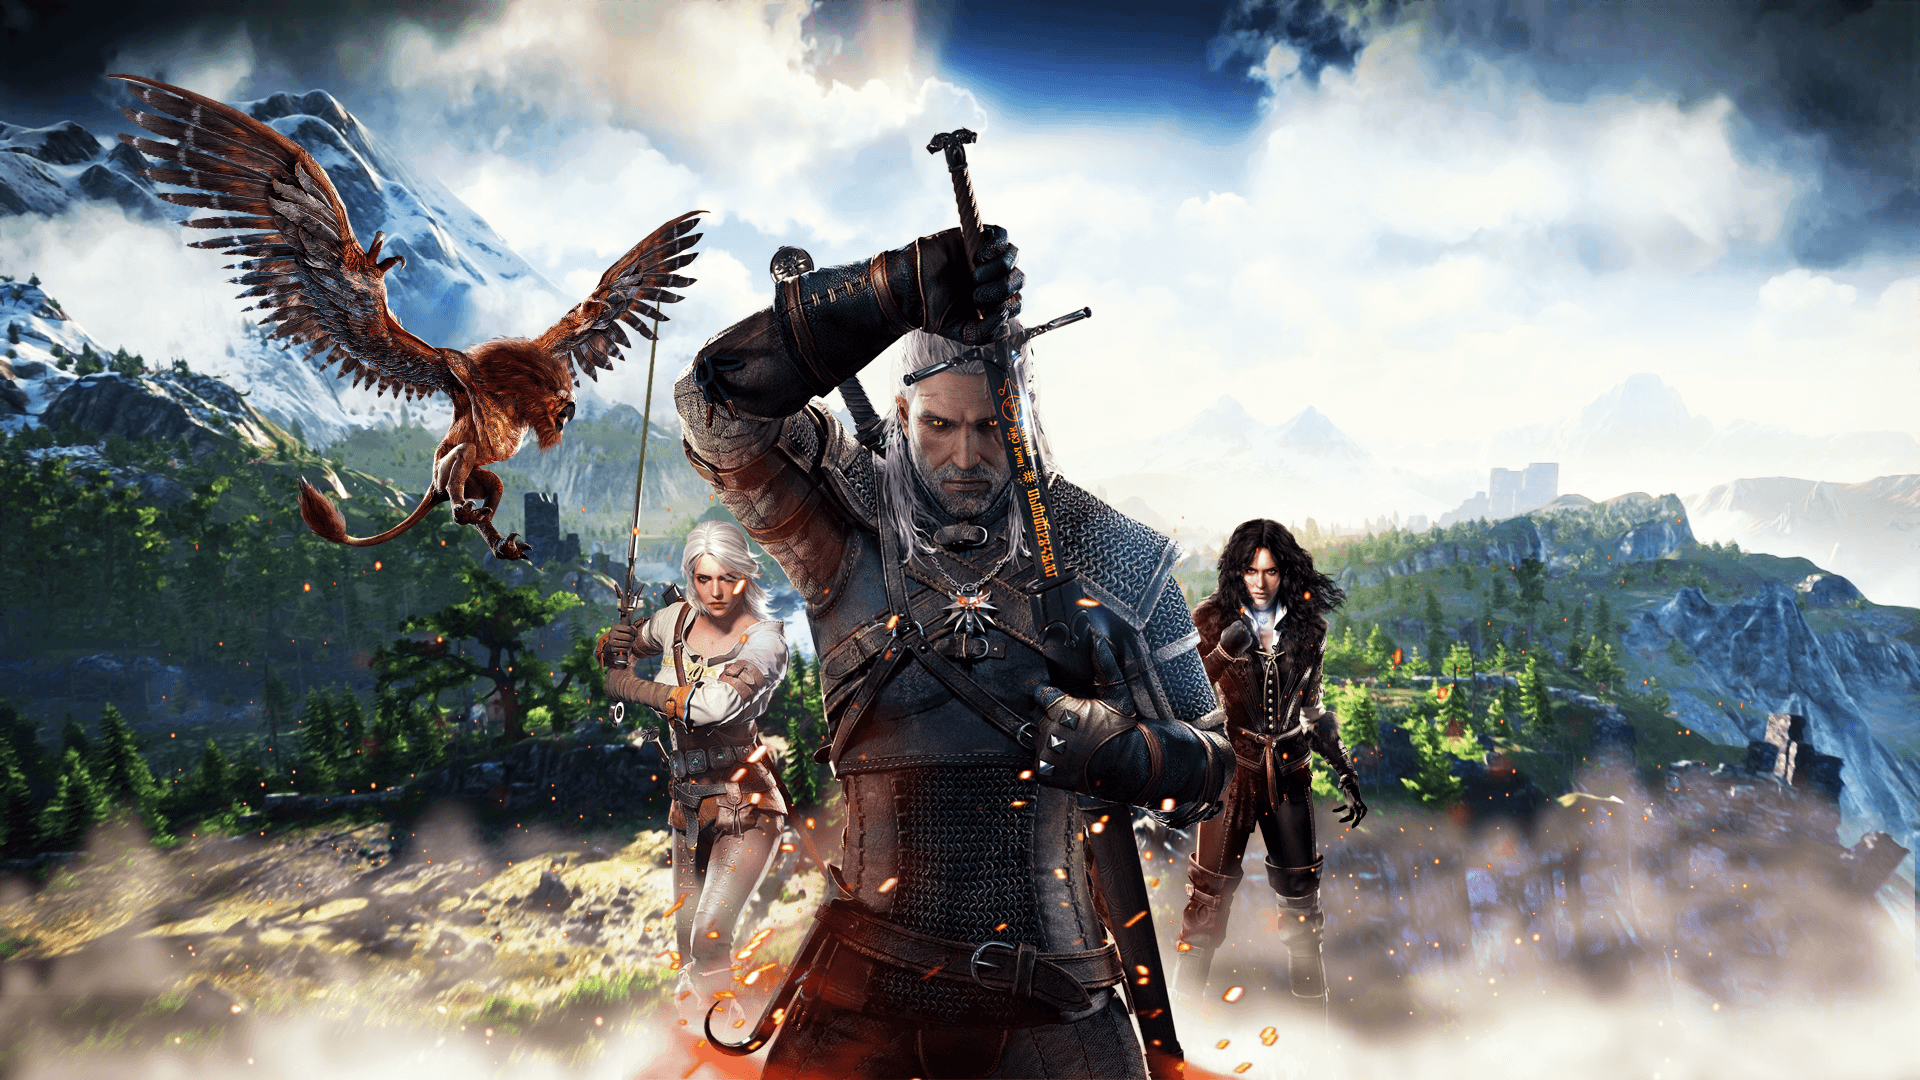 Witcher 3 Screensaver Wallpapers